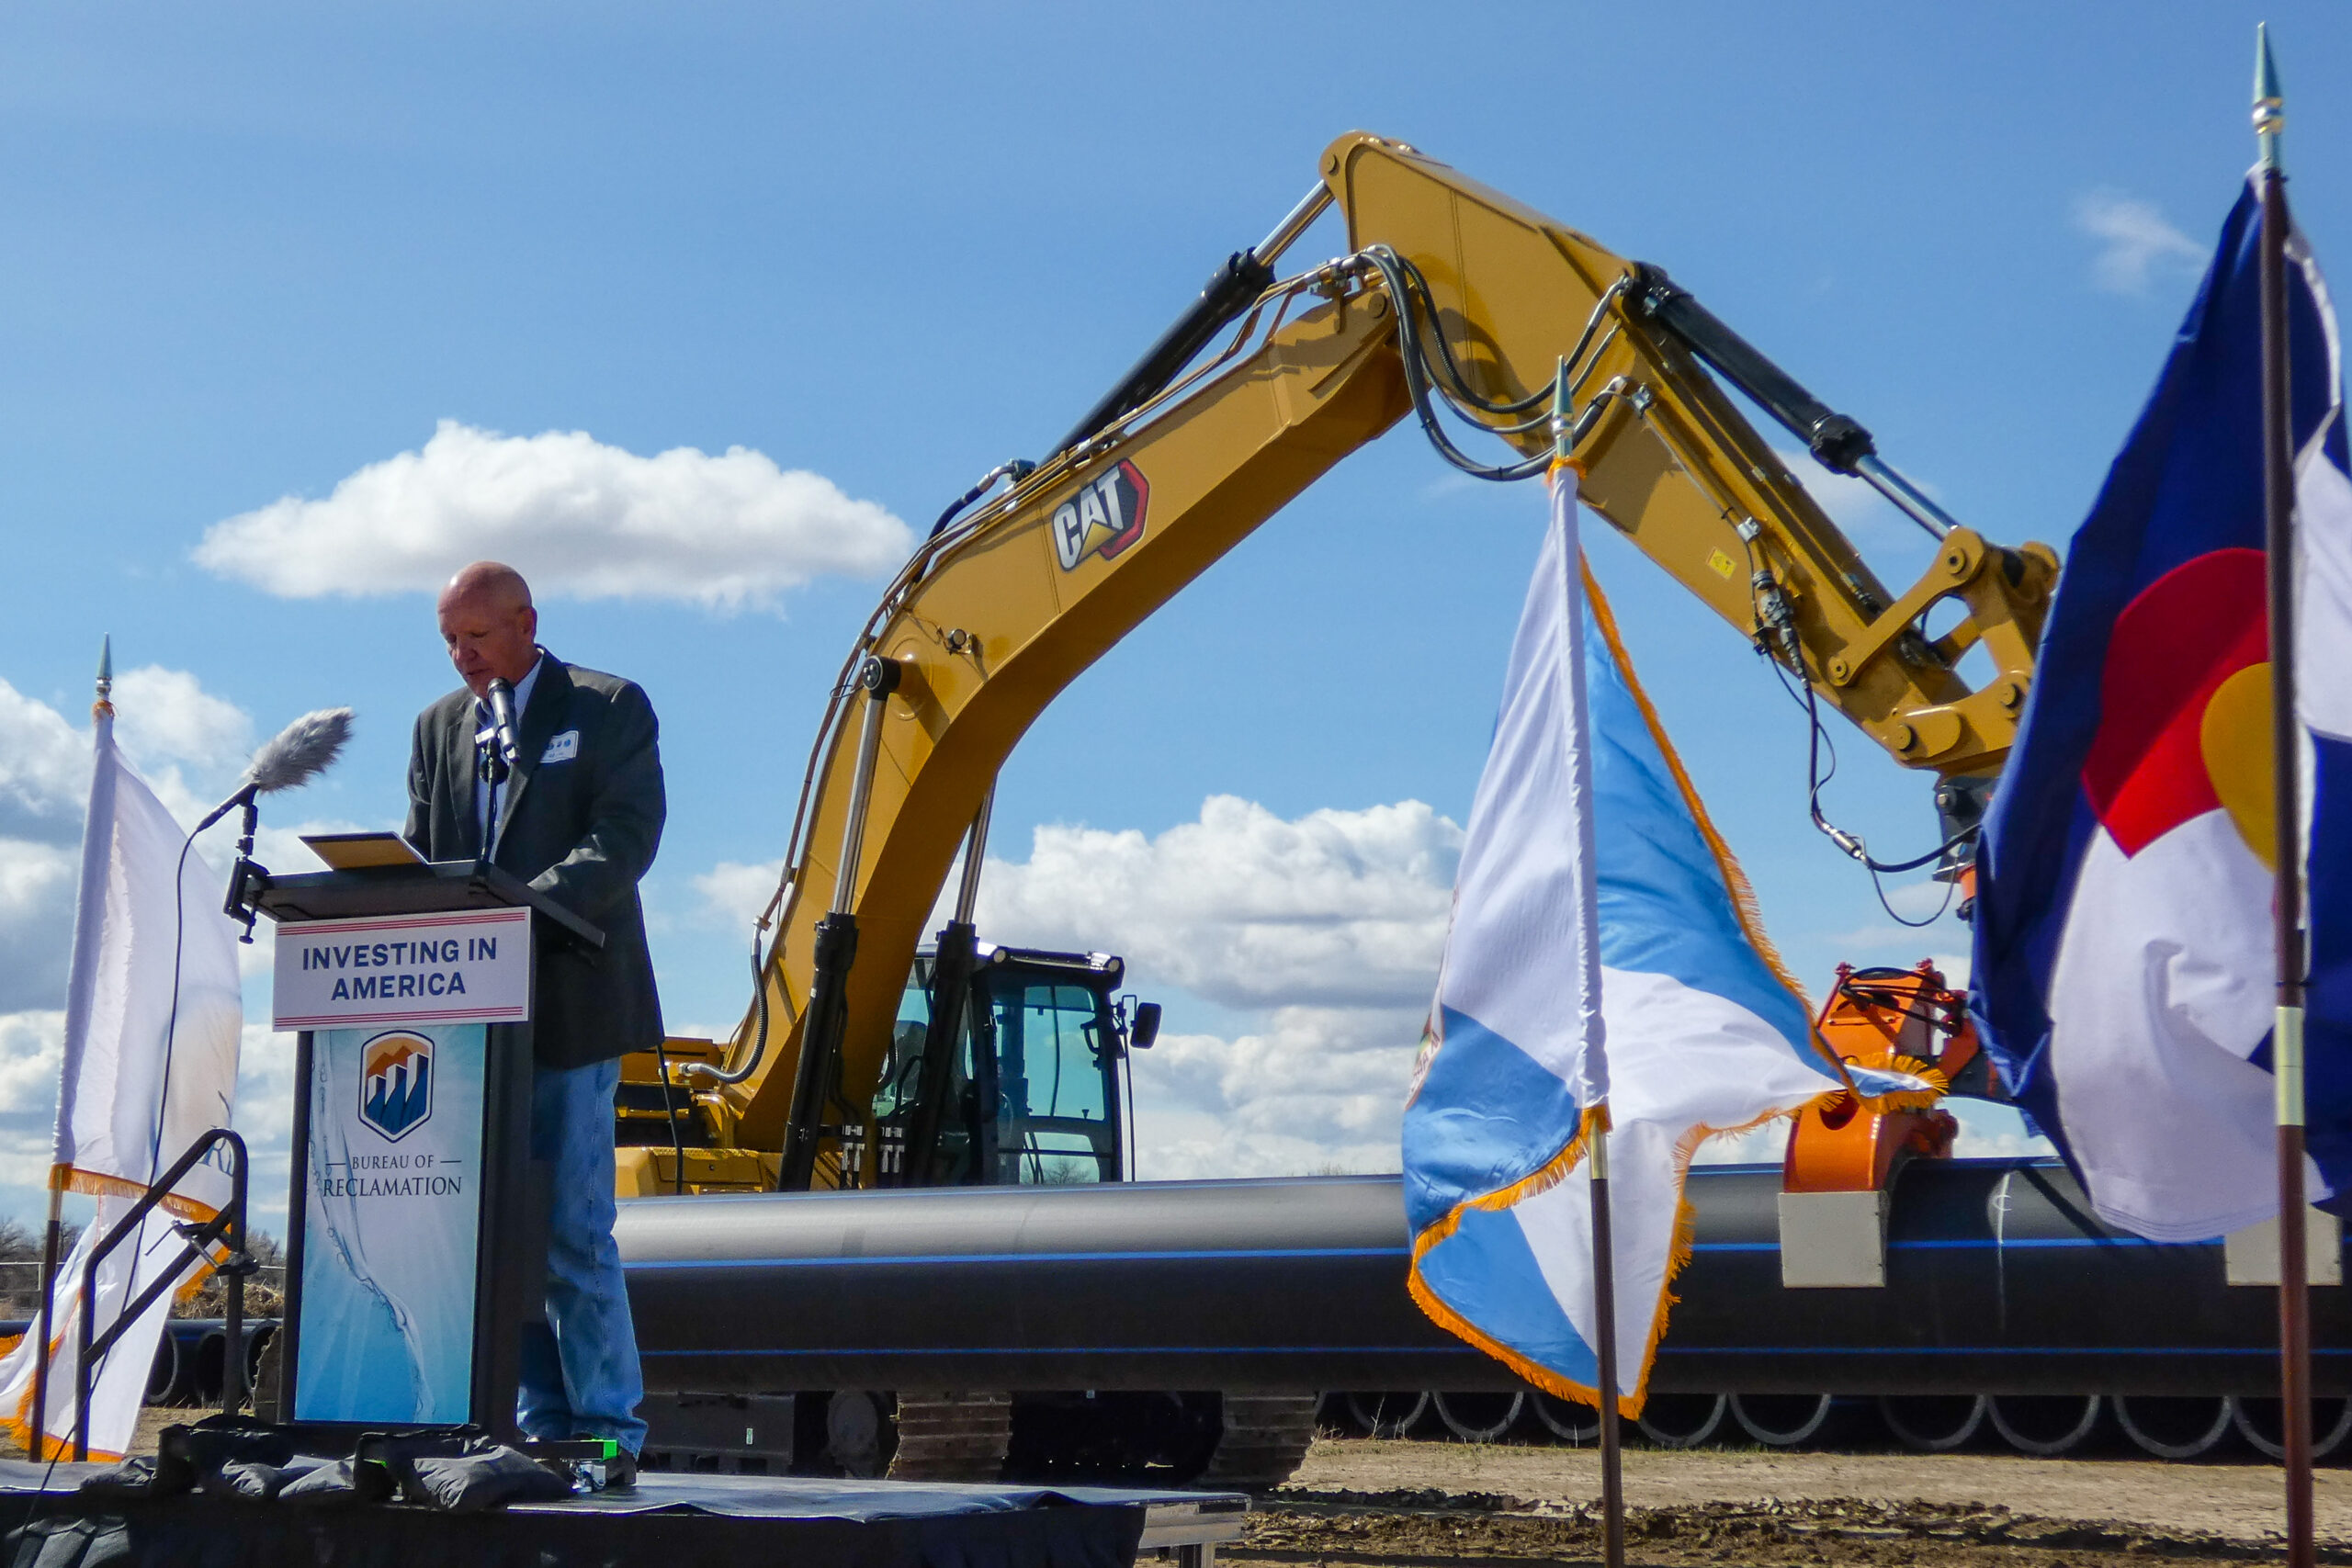 Bill Long, President of the Southeastern Colorado Water Conservancy District speaks during the ground breaking ceremony for the Arkansas Valley Conduit Project that will bring clean drinking water to some 50,000 people in the region. (April 28, 2023)